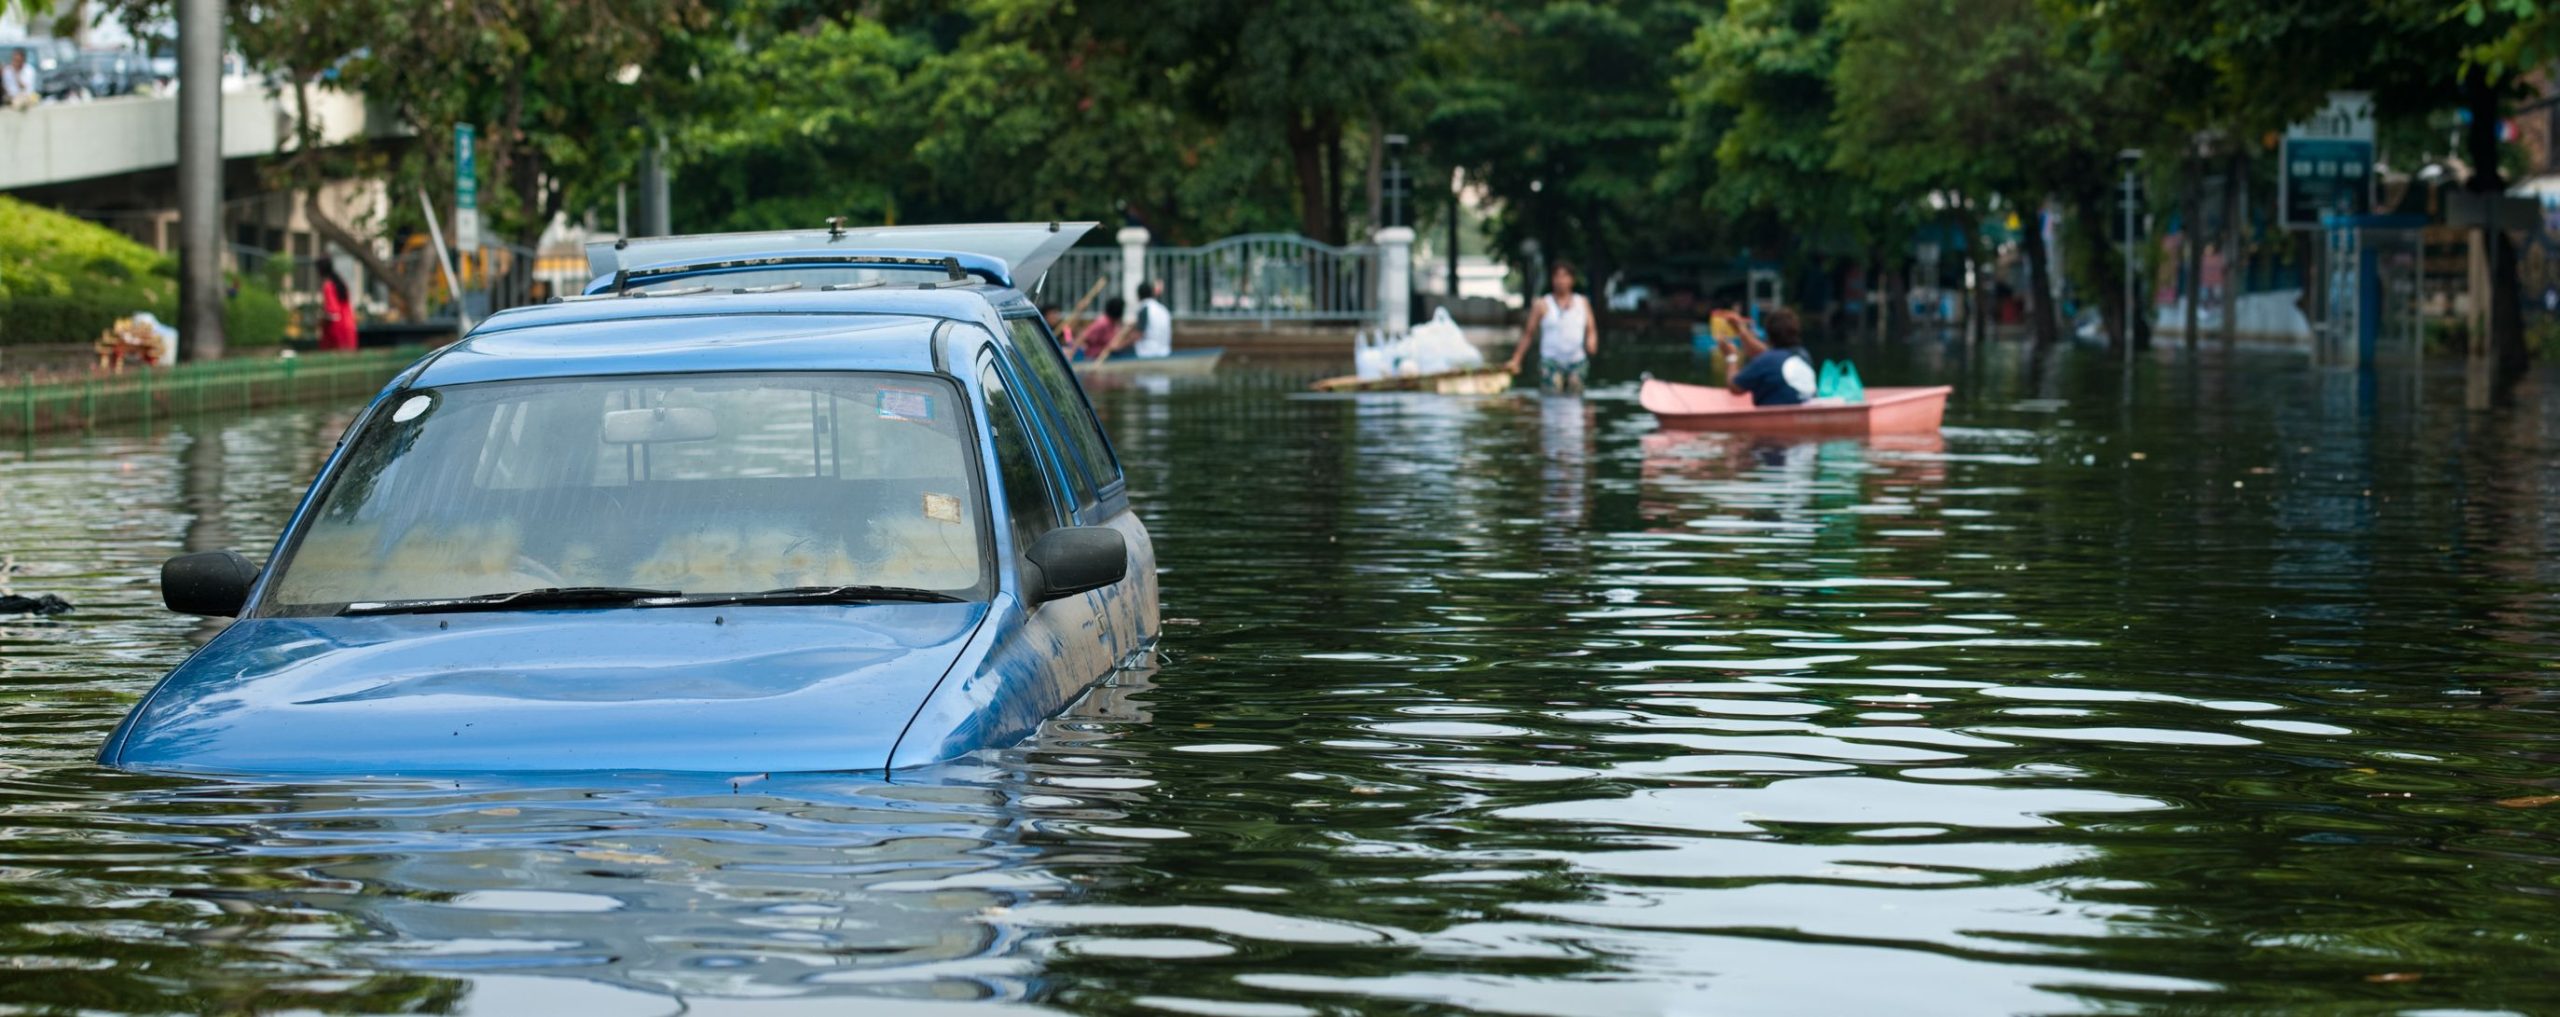 Car Flood Insurance Everything You Need To Know The Tech Edvocate 3049